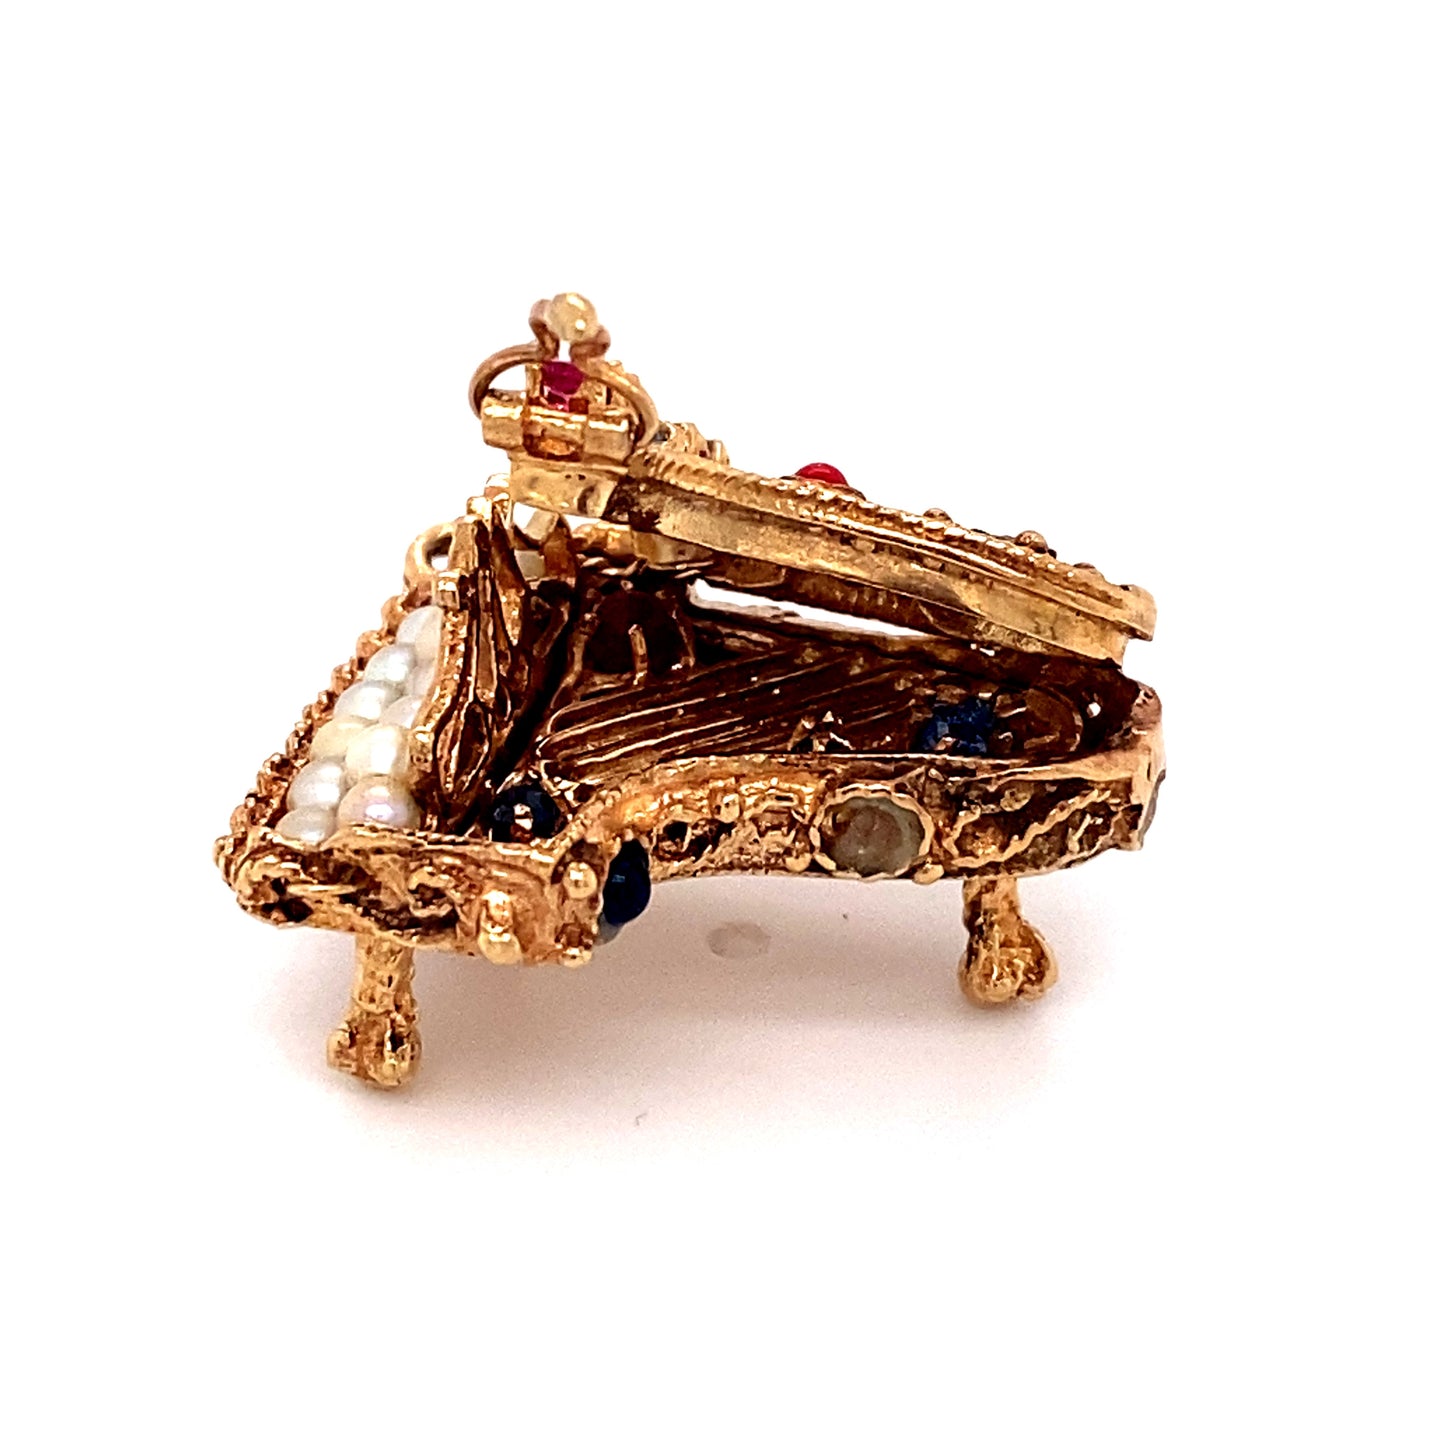 Circa 1950 Pearl, Ruby and Sapphire Articulated Piano Pendant in 14 Karat Gold